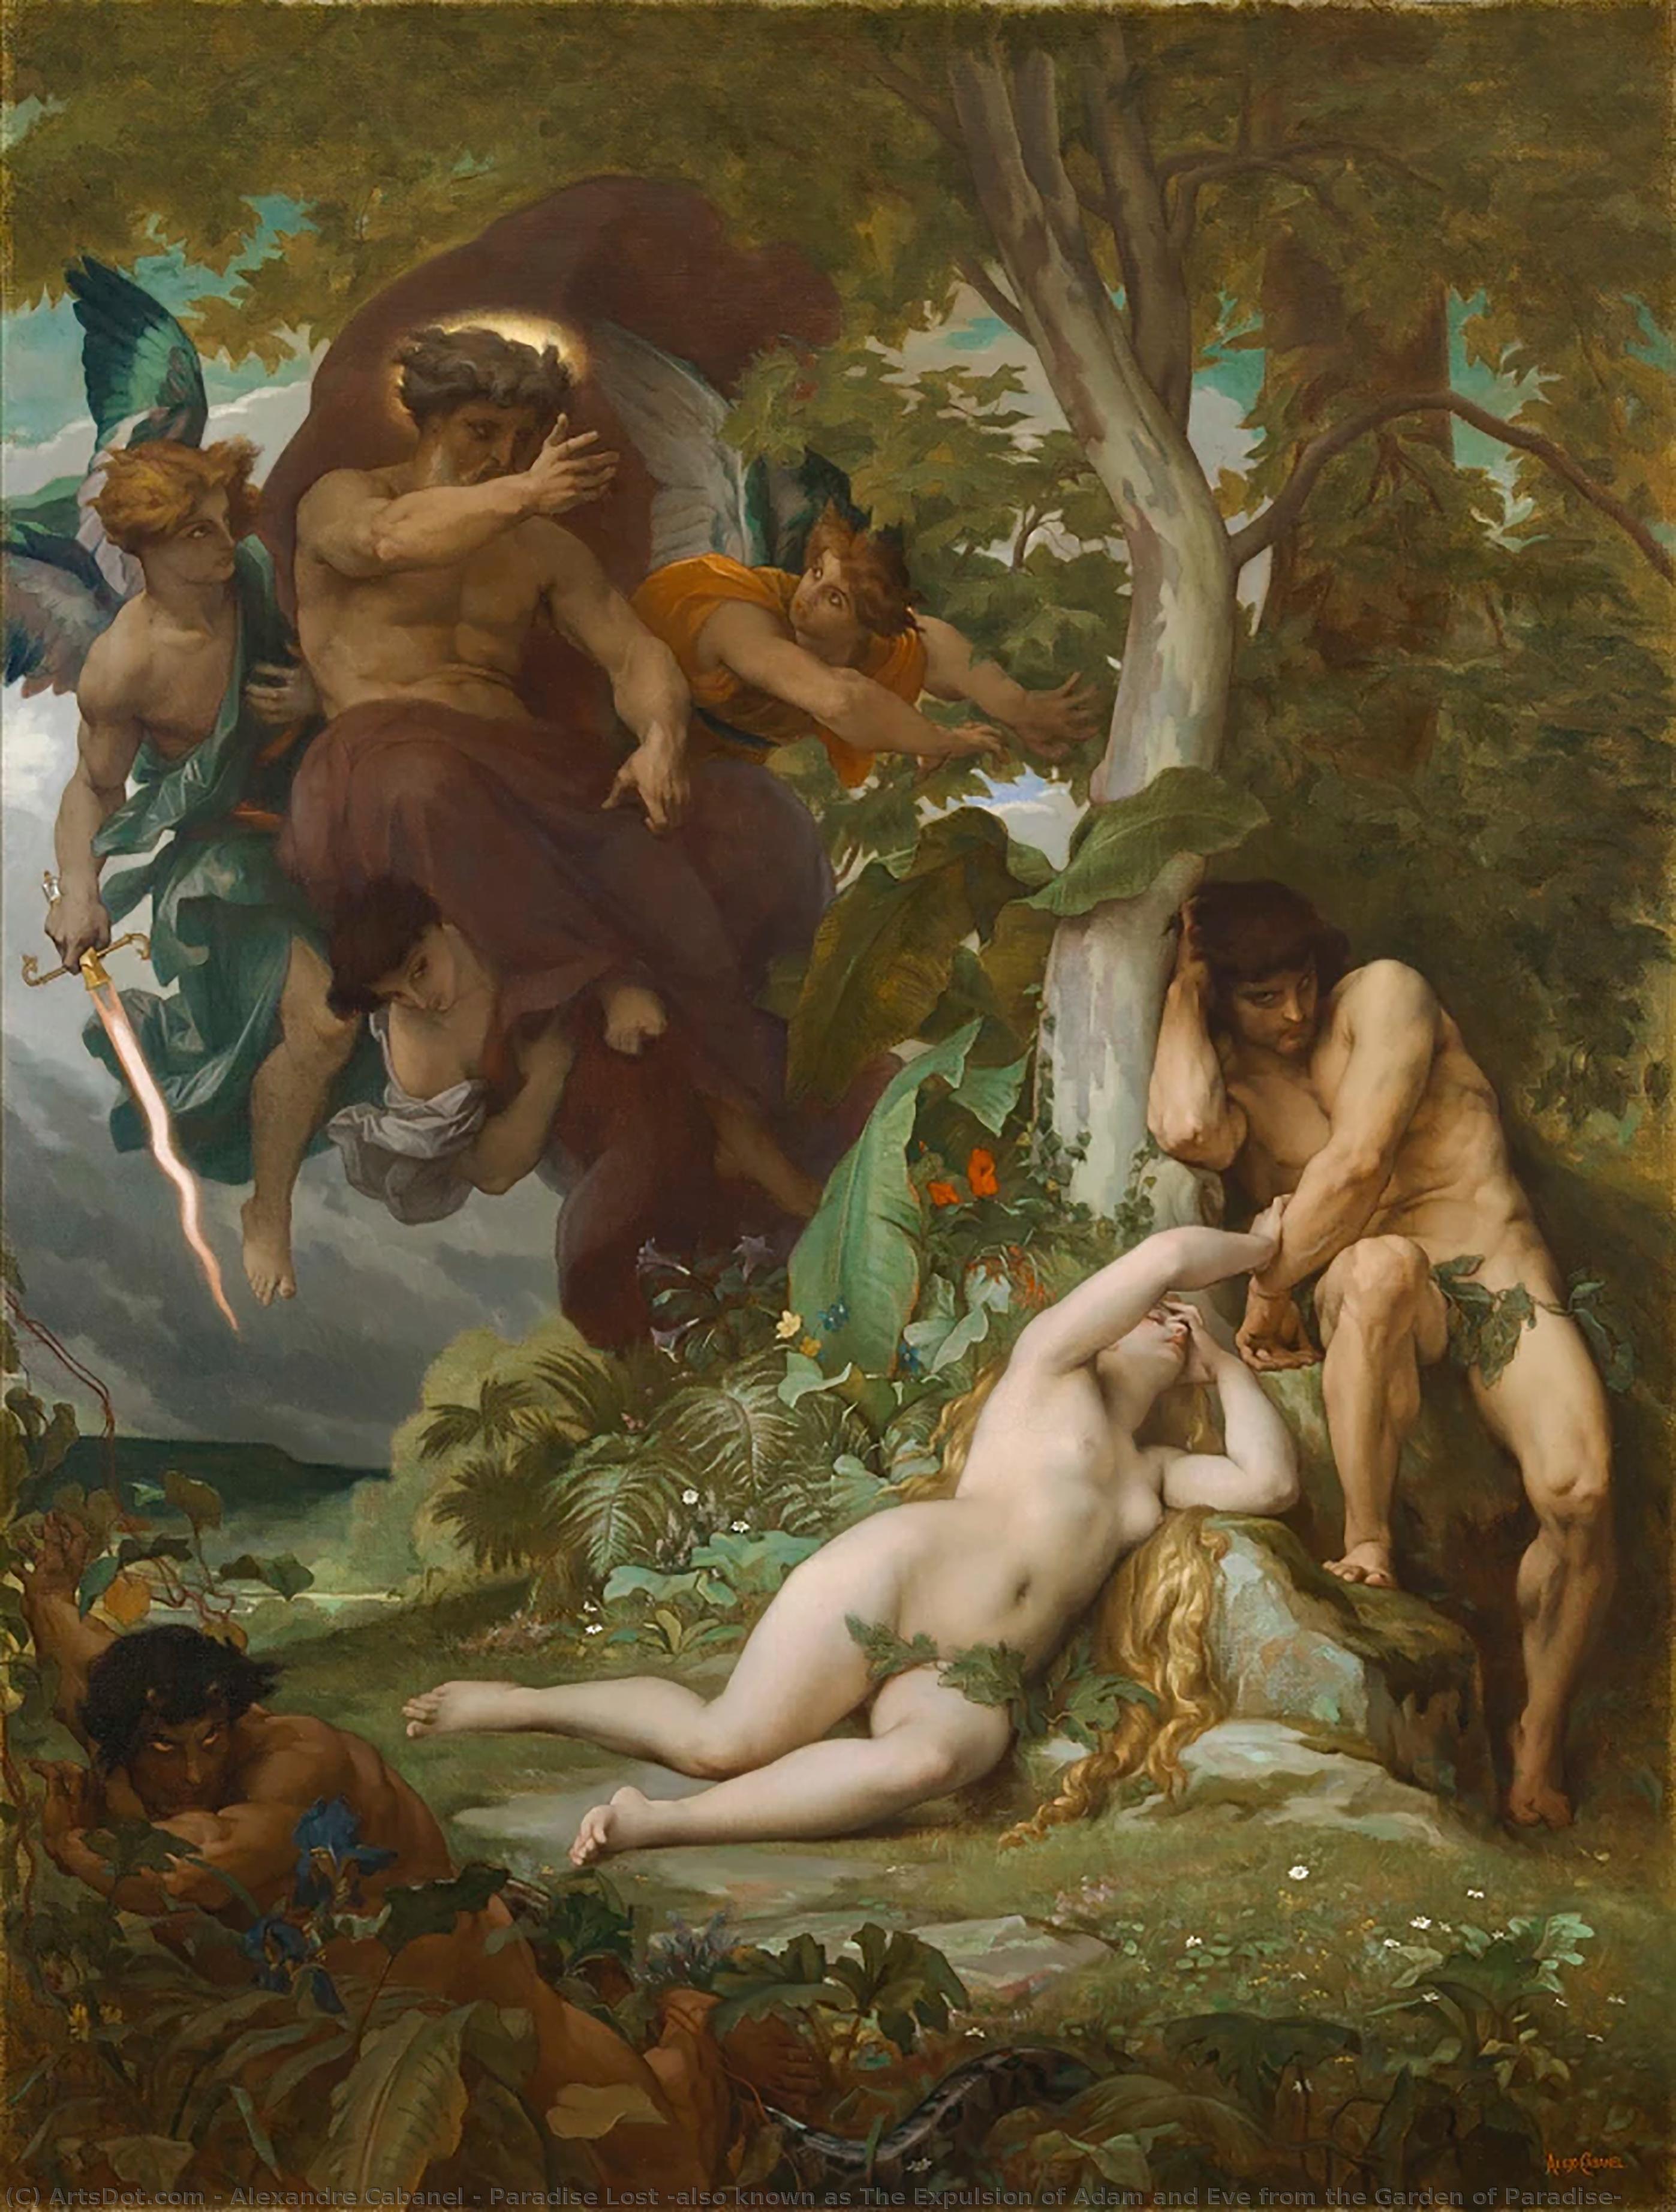 WikiOO.org - Güzel Sanatlar Ansiklopedisi - Resim, Resimler Alexandre Cabanel - Paradise Lost (also known as The Expulsion of Adam and Eve from the Garden of Paradise)